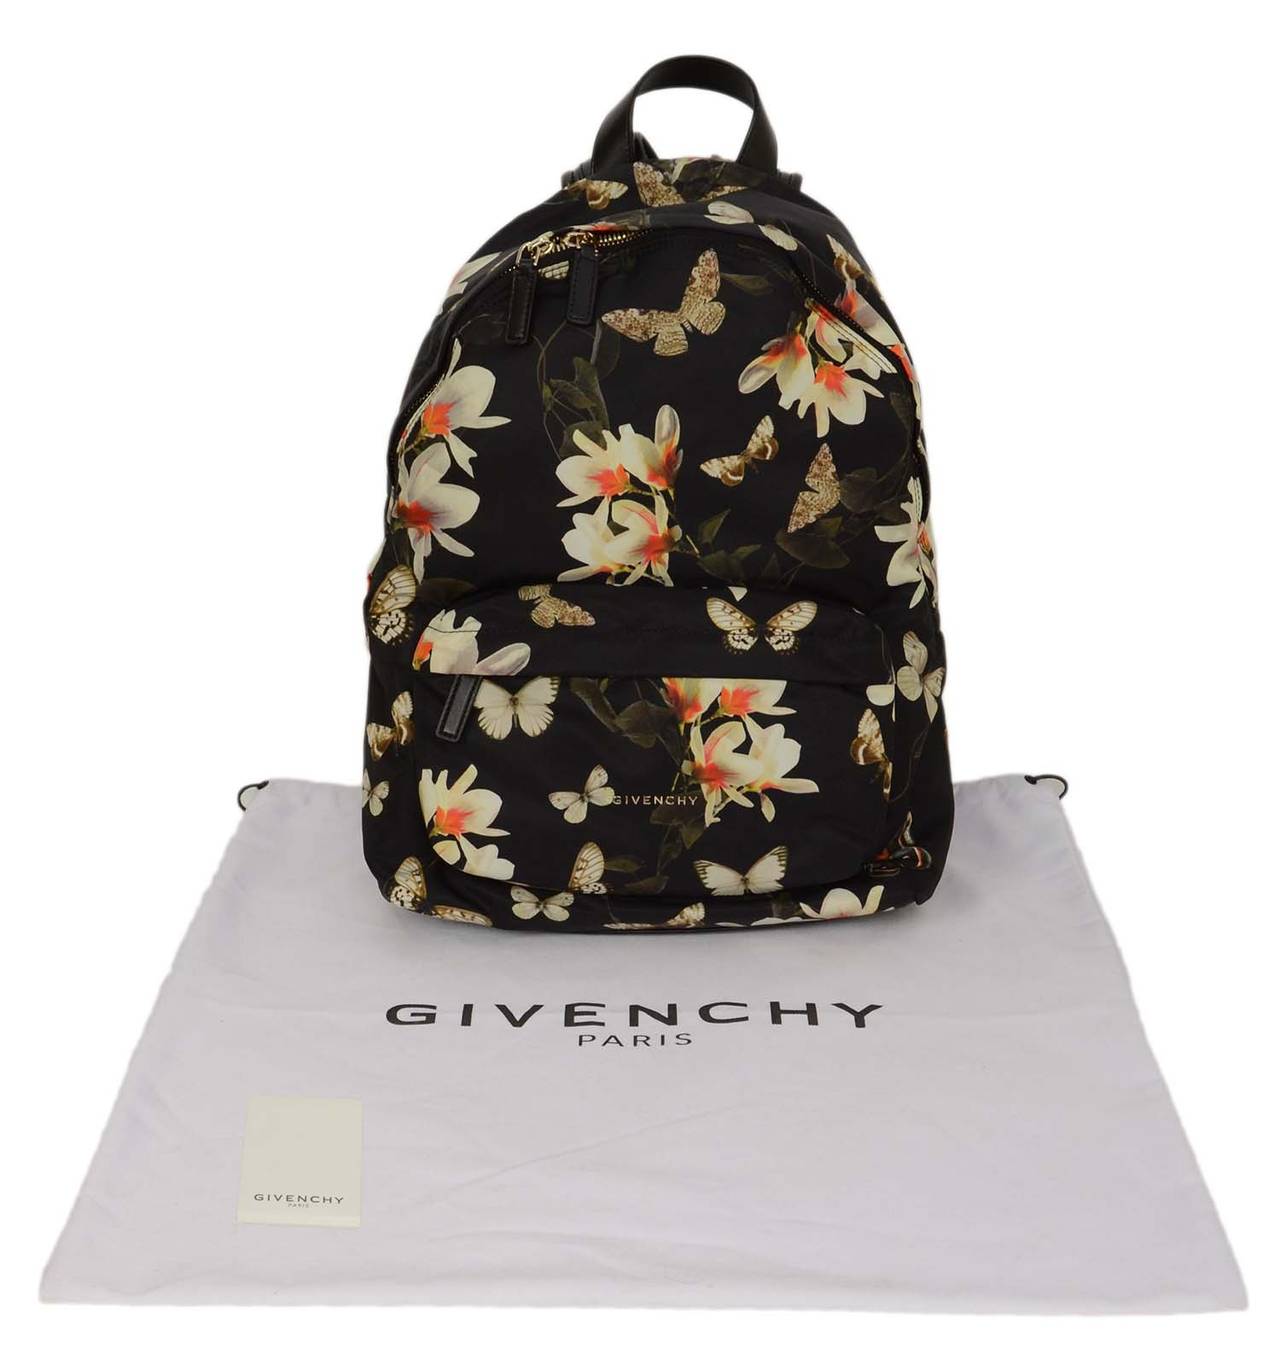 GIVENCHY Floral and Butterfly Print Black Nylon Backpack rt $1,320 at